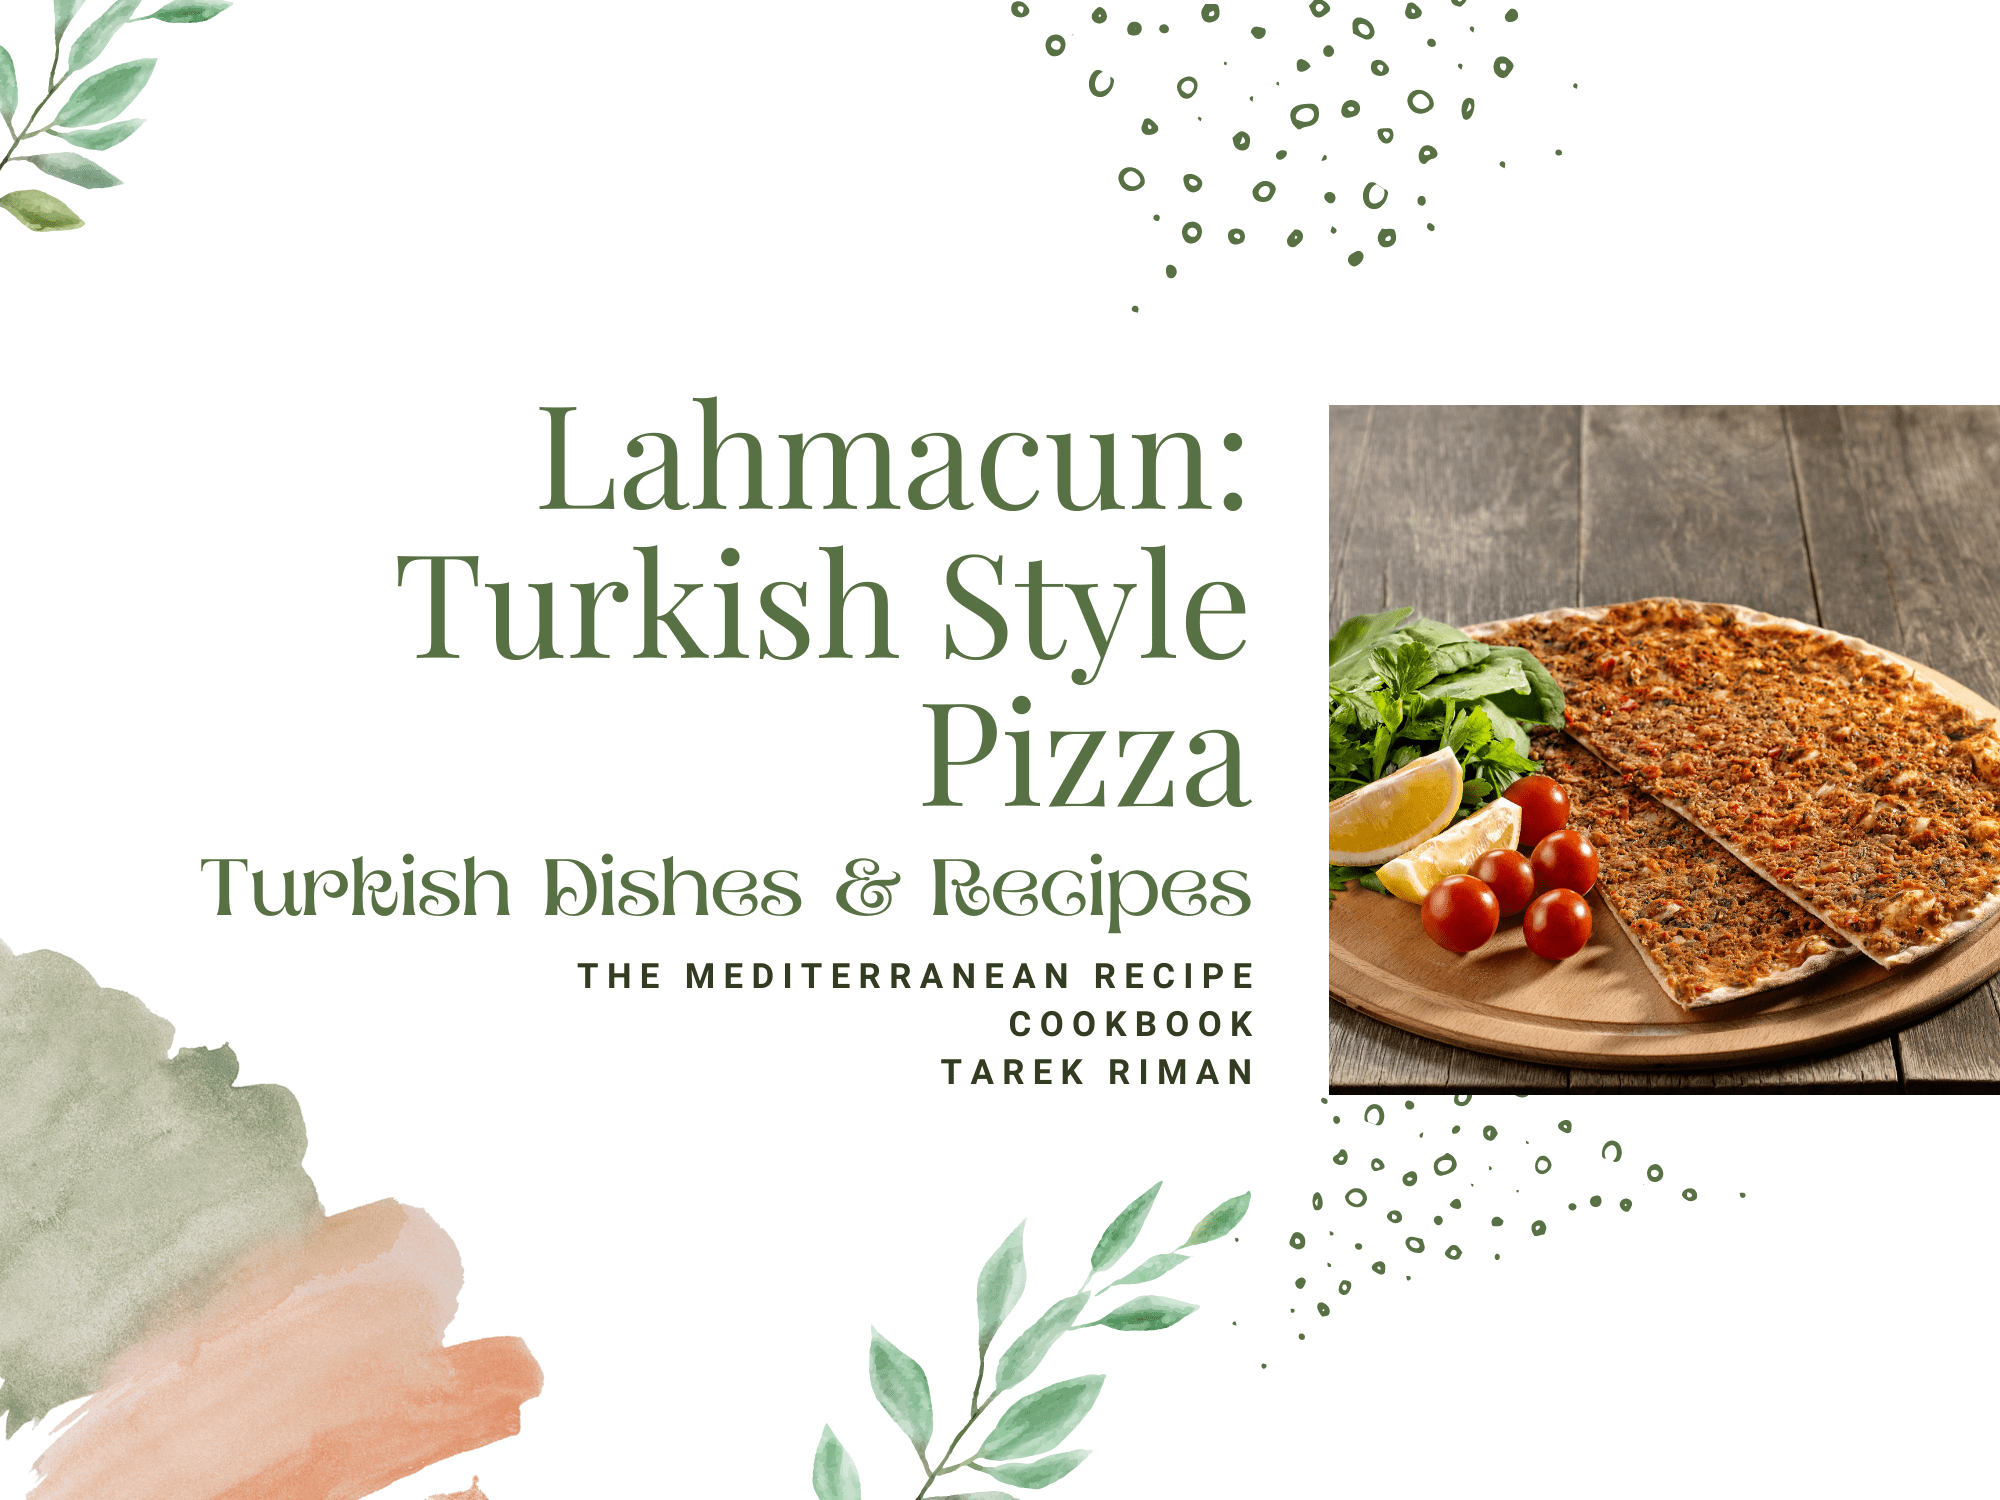 How to make Lahmacun: Turkish Style Pizza